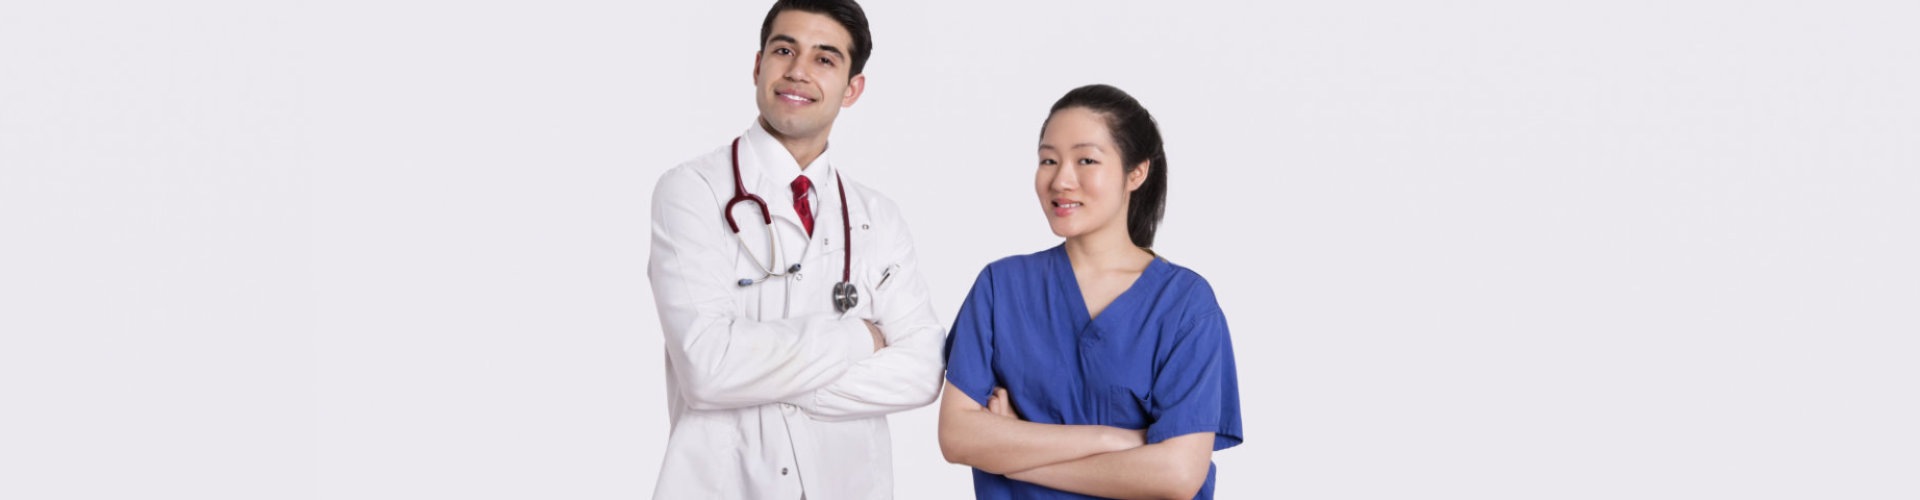 doctor wearing stethoscope and nurse smiling